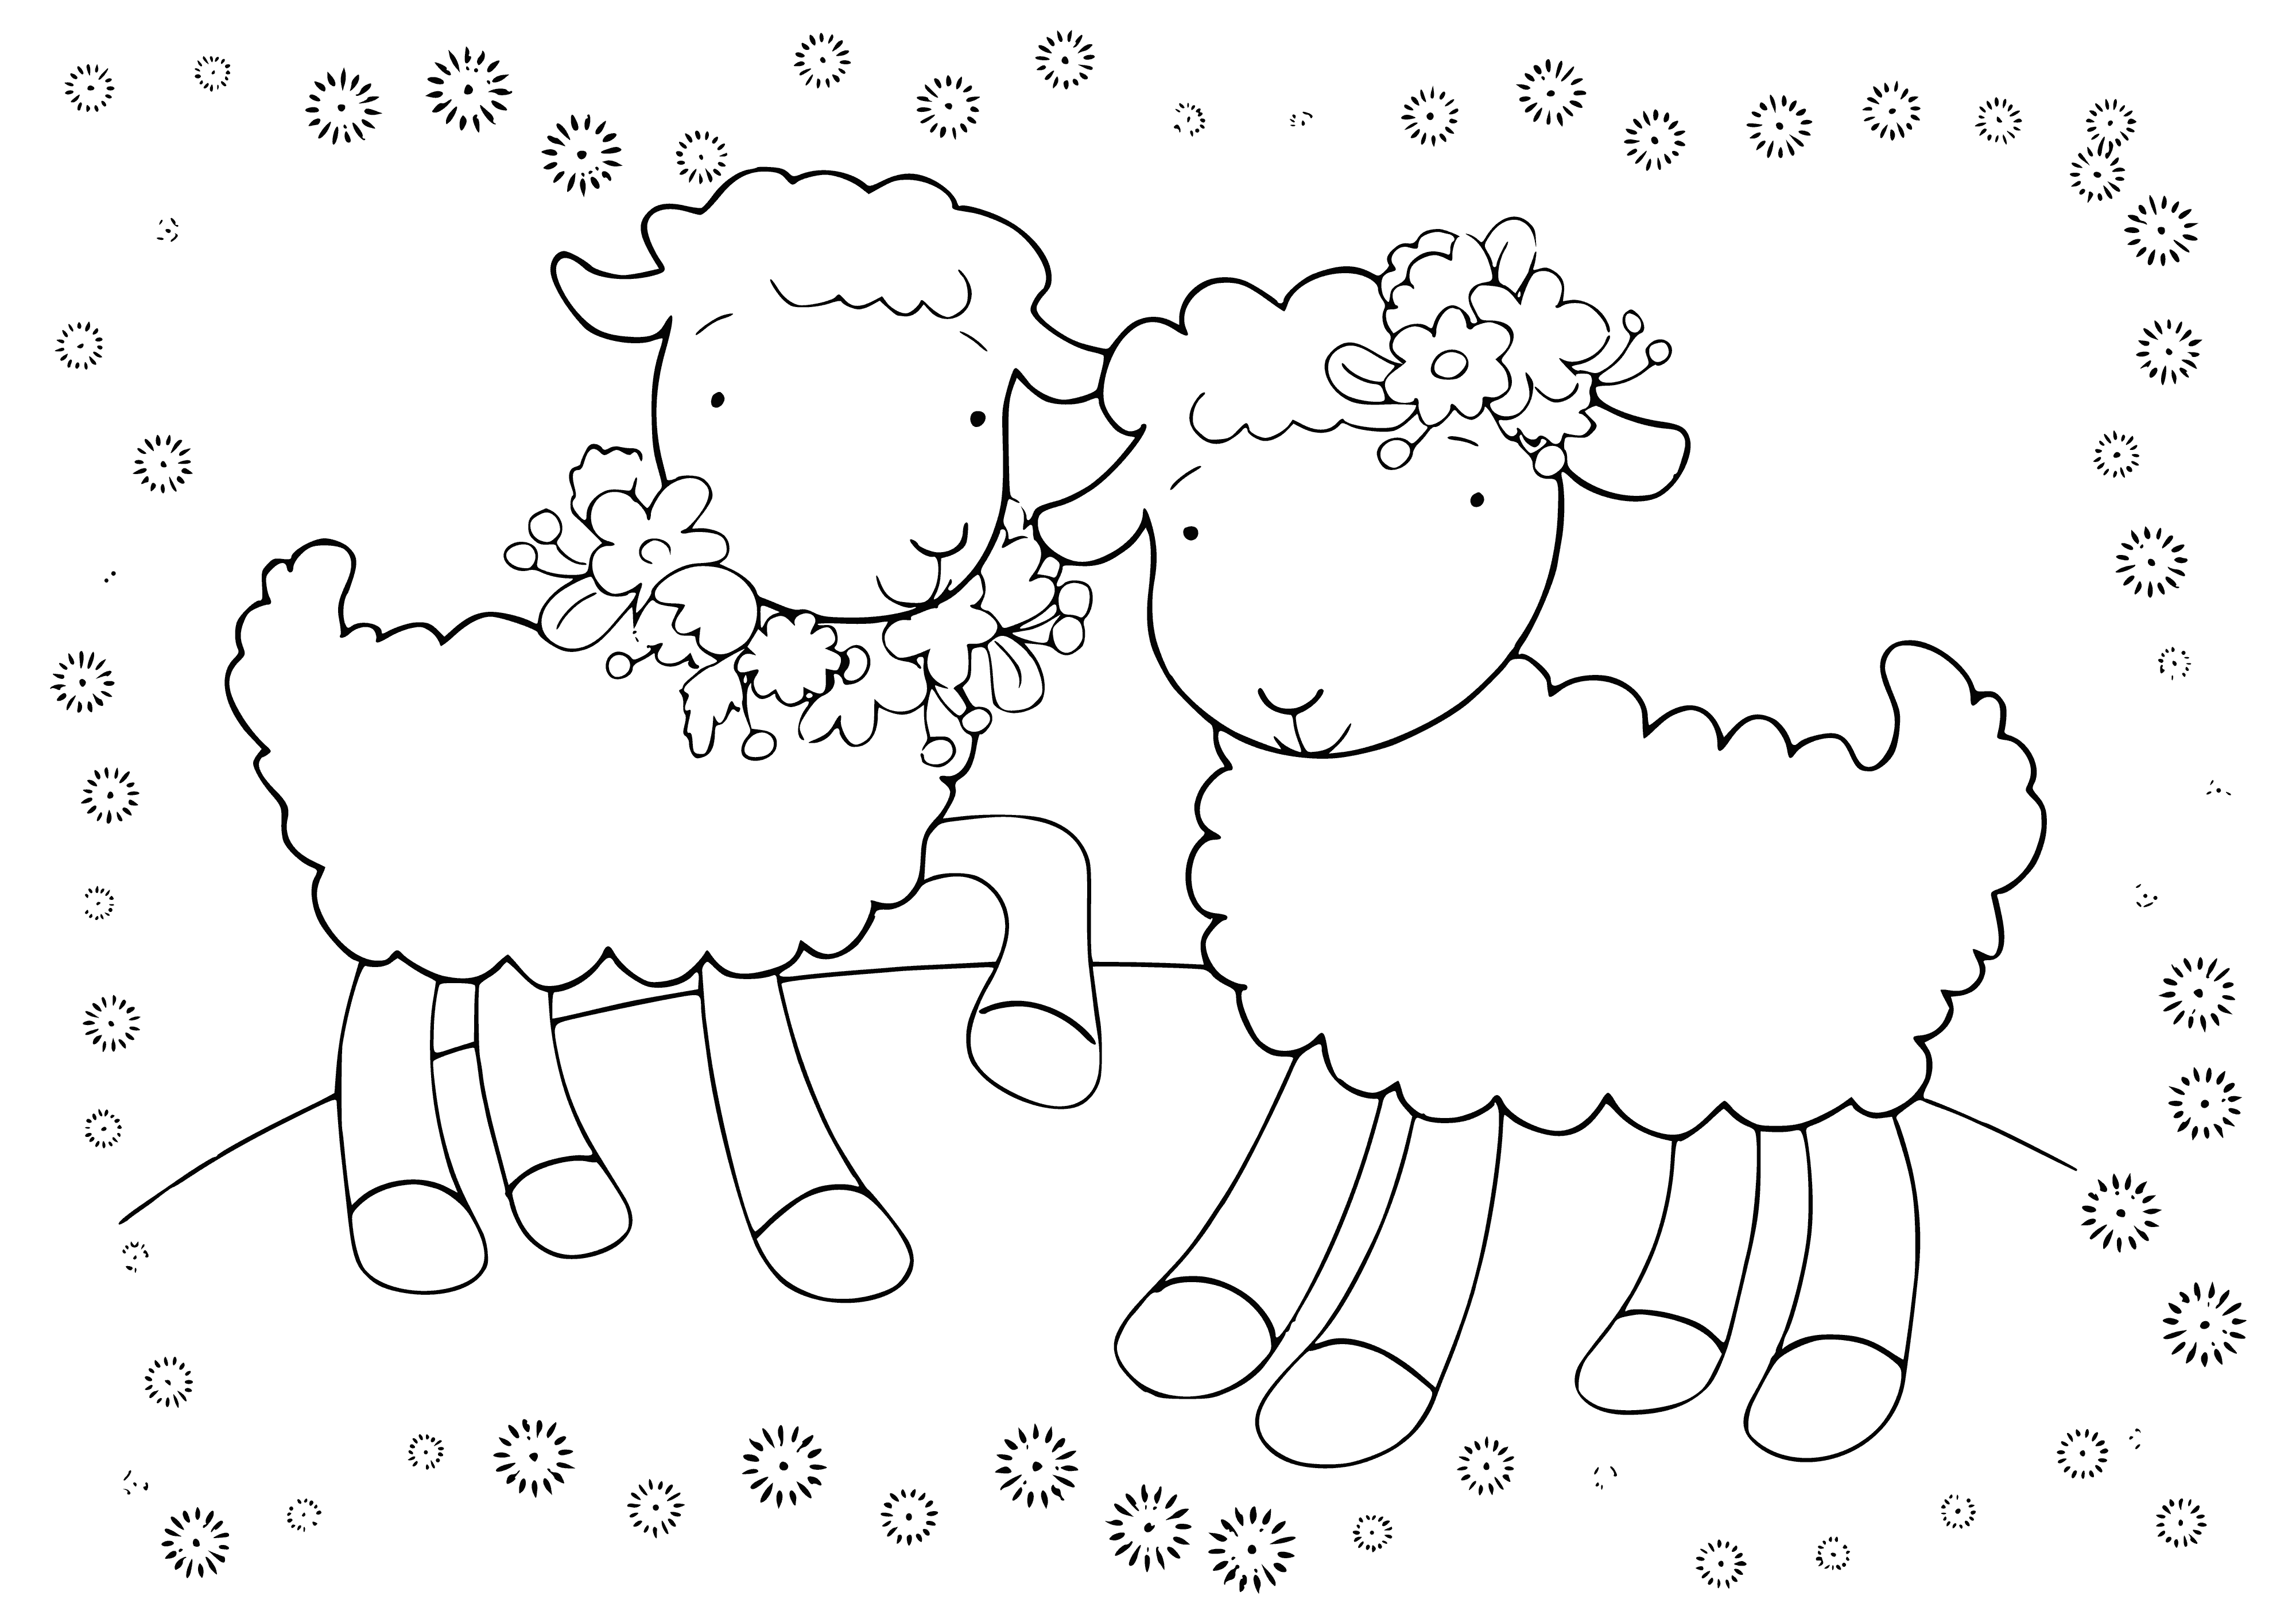 coloring page: Two sheep and one goat in coloring page; sheep standing next to each other, goat in front looking directly at viewer.